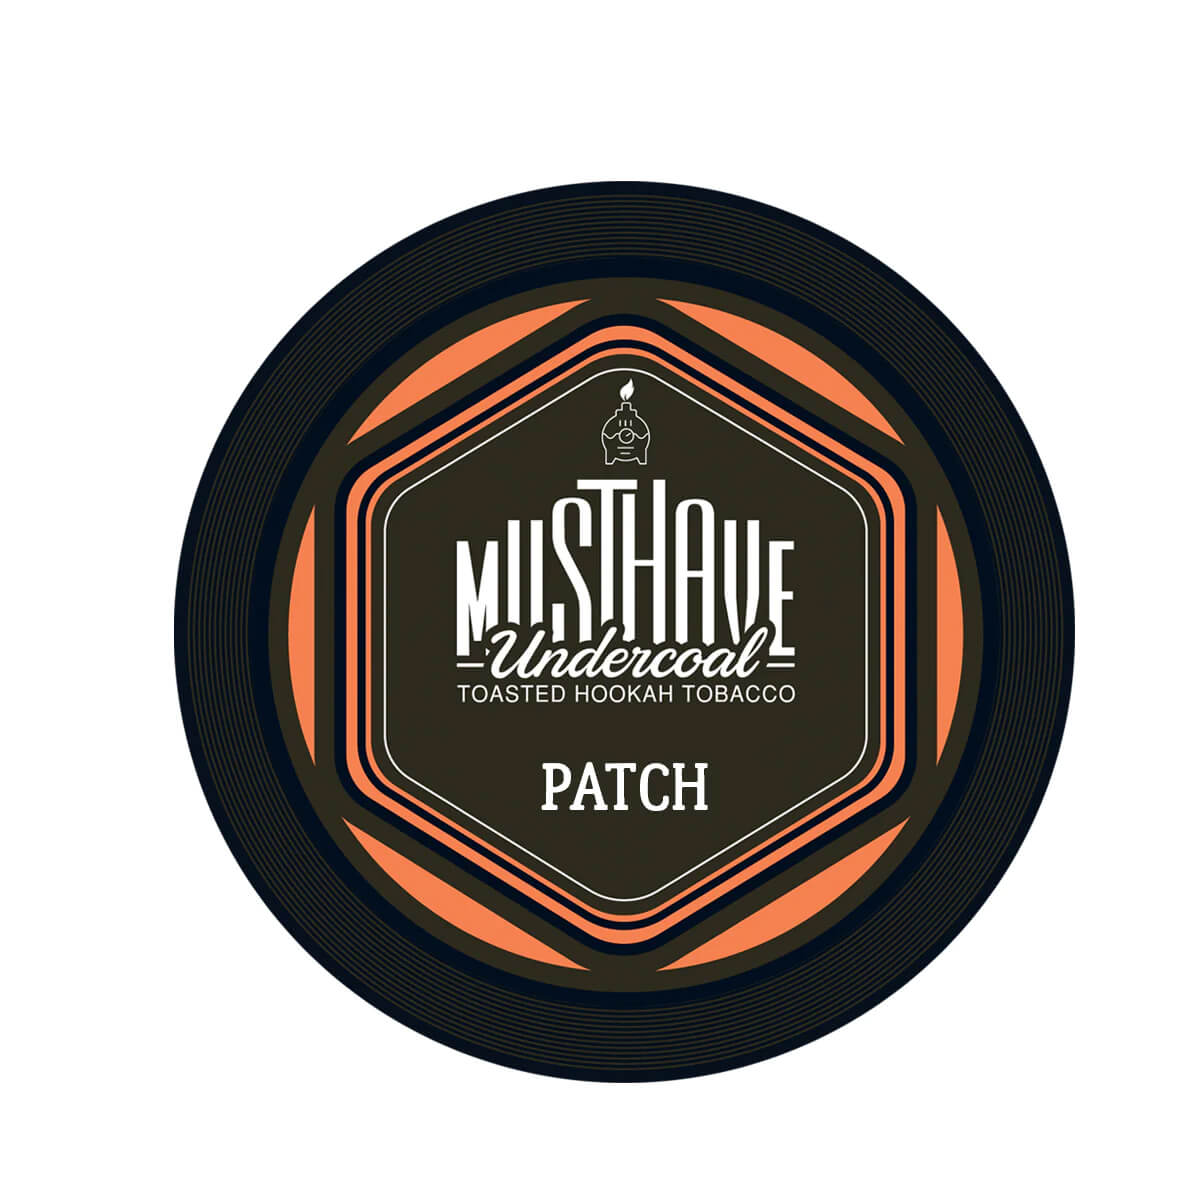 Musthave Tabak Patch 25g